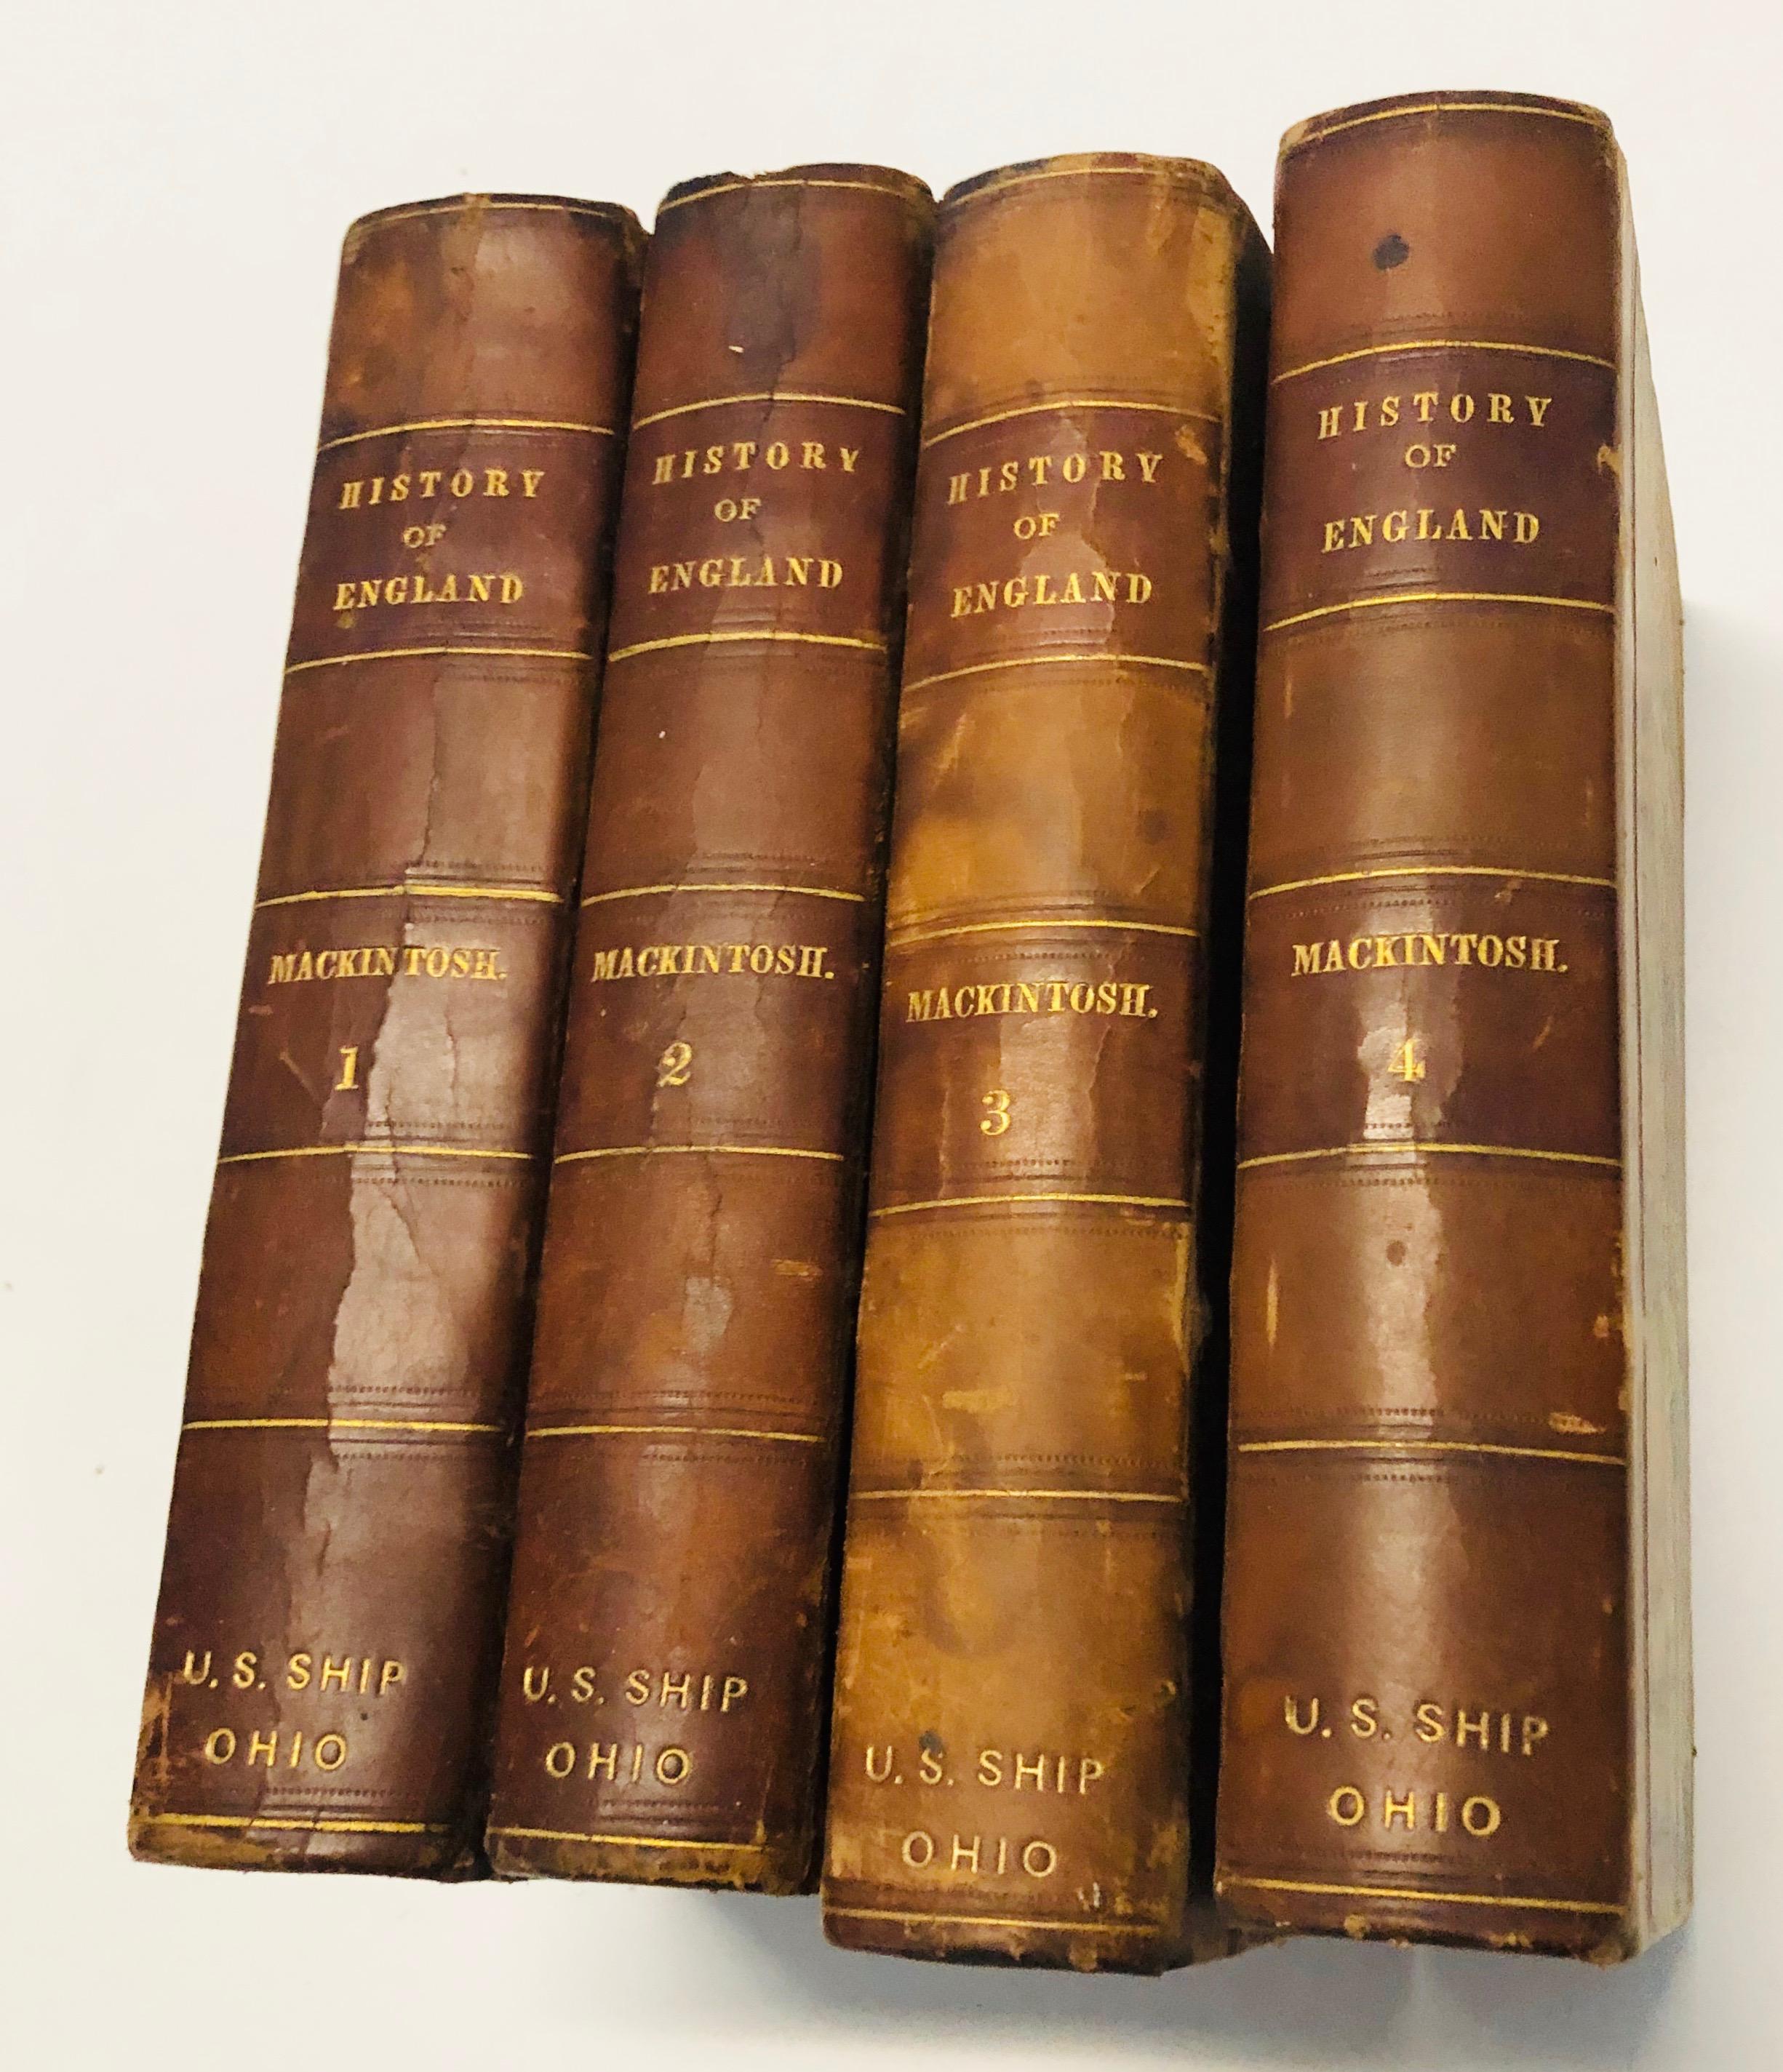 RARE History of England (1841) FOUR Volumes WAS ON THE U.S. OHIO